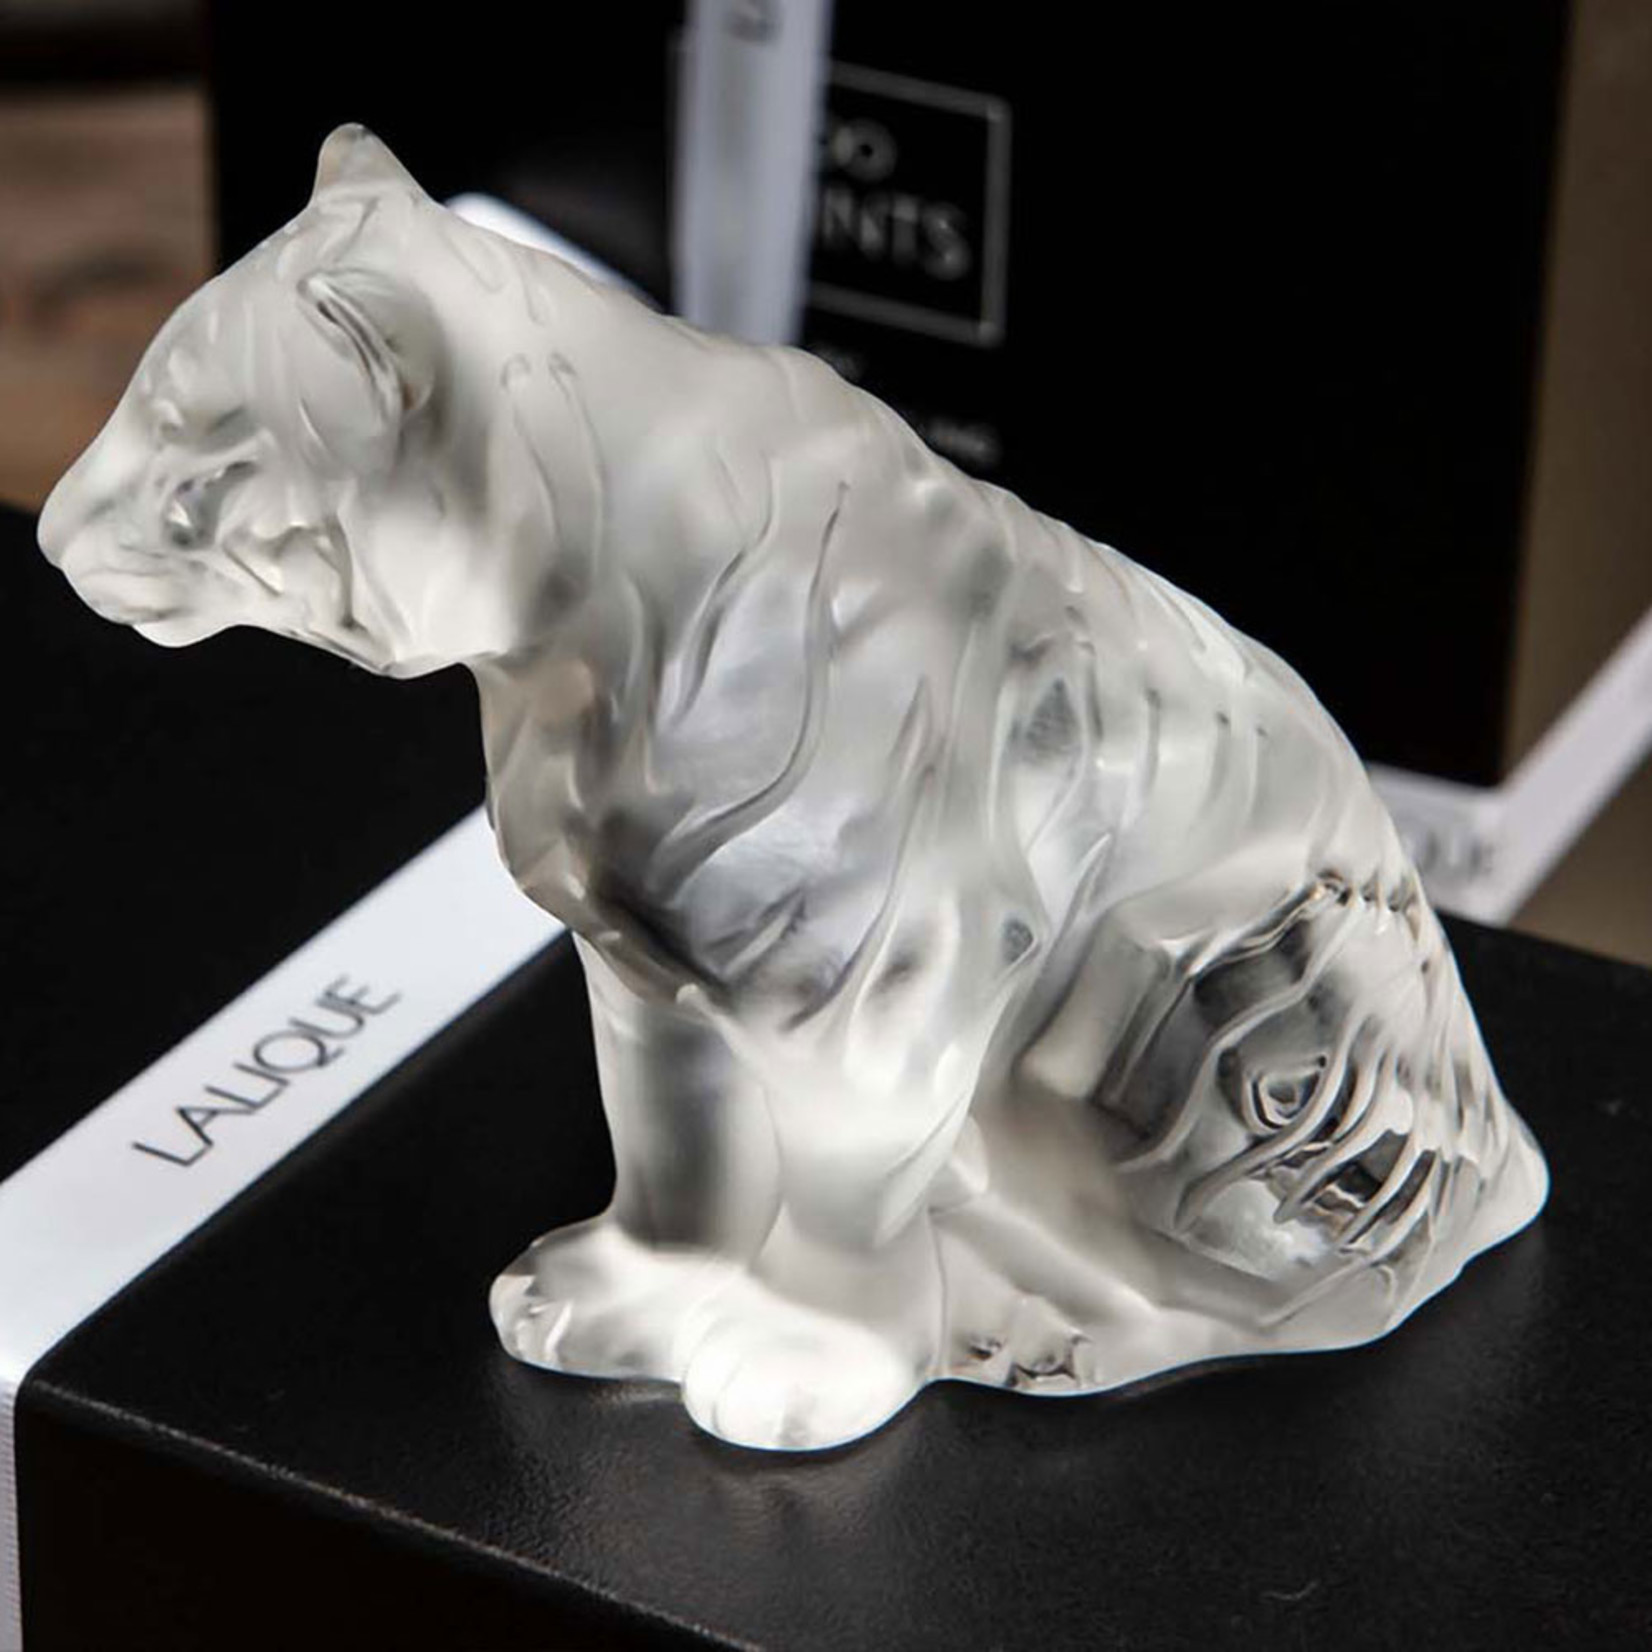 Lalique Small Sitting Tiger